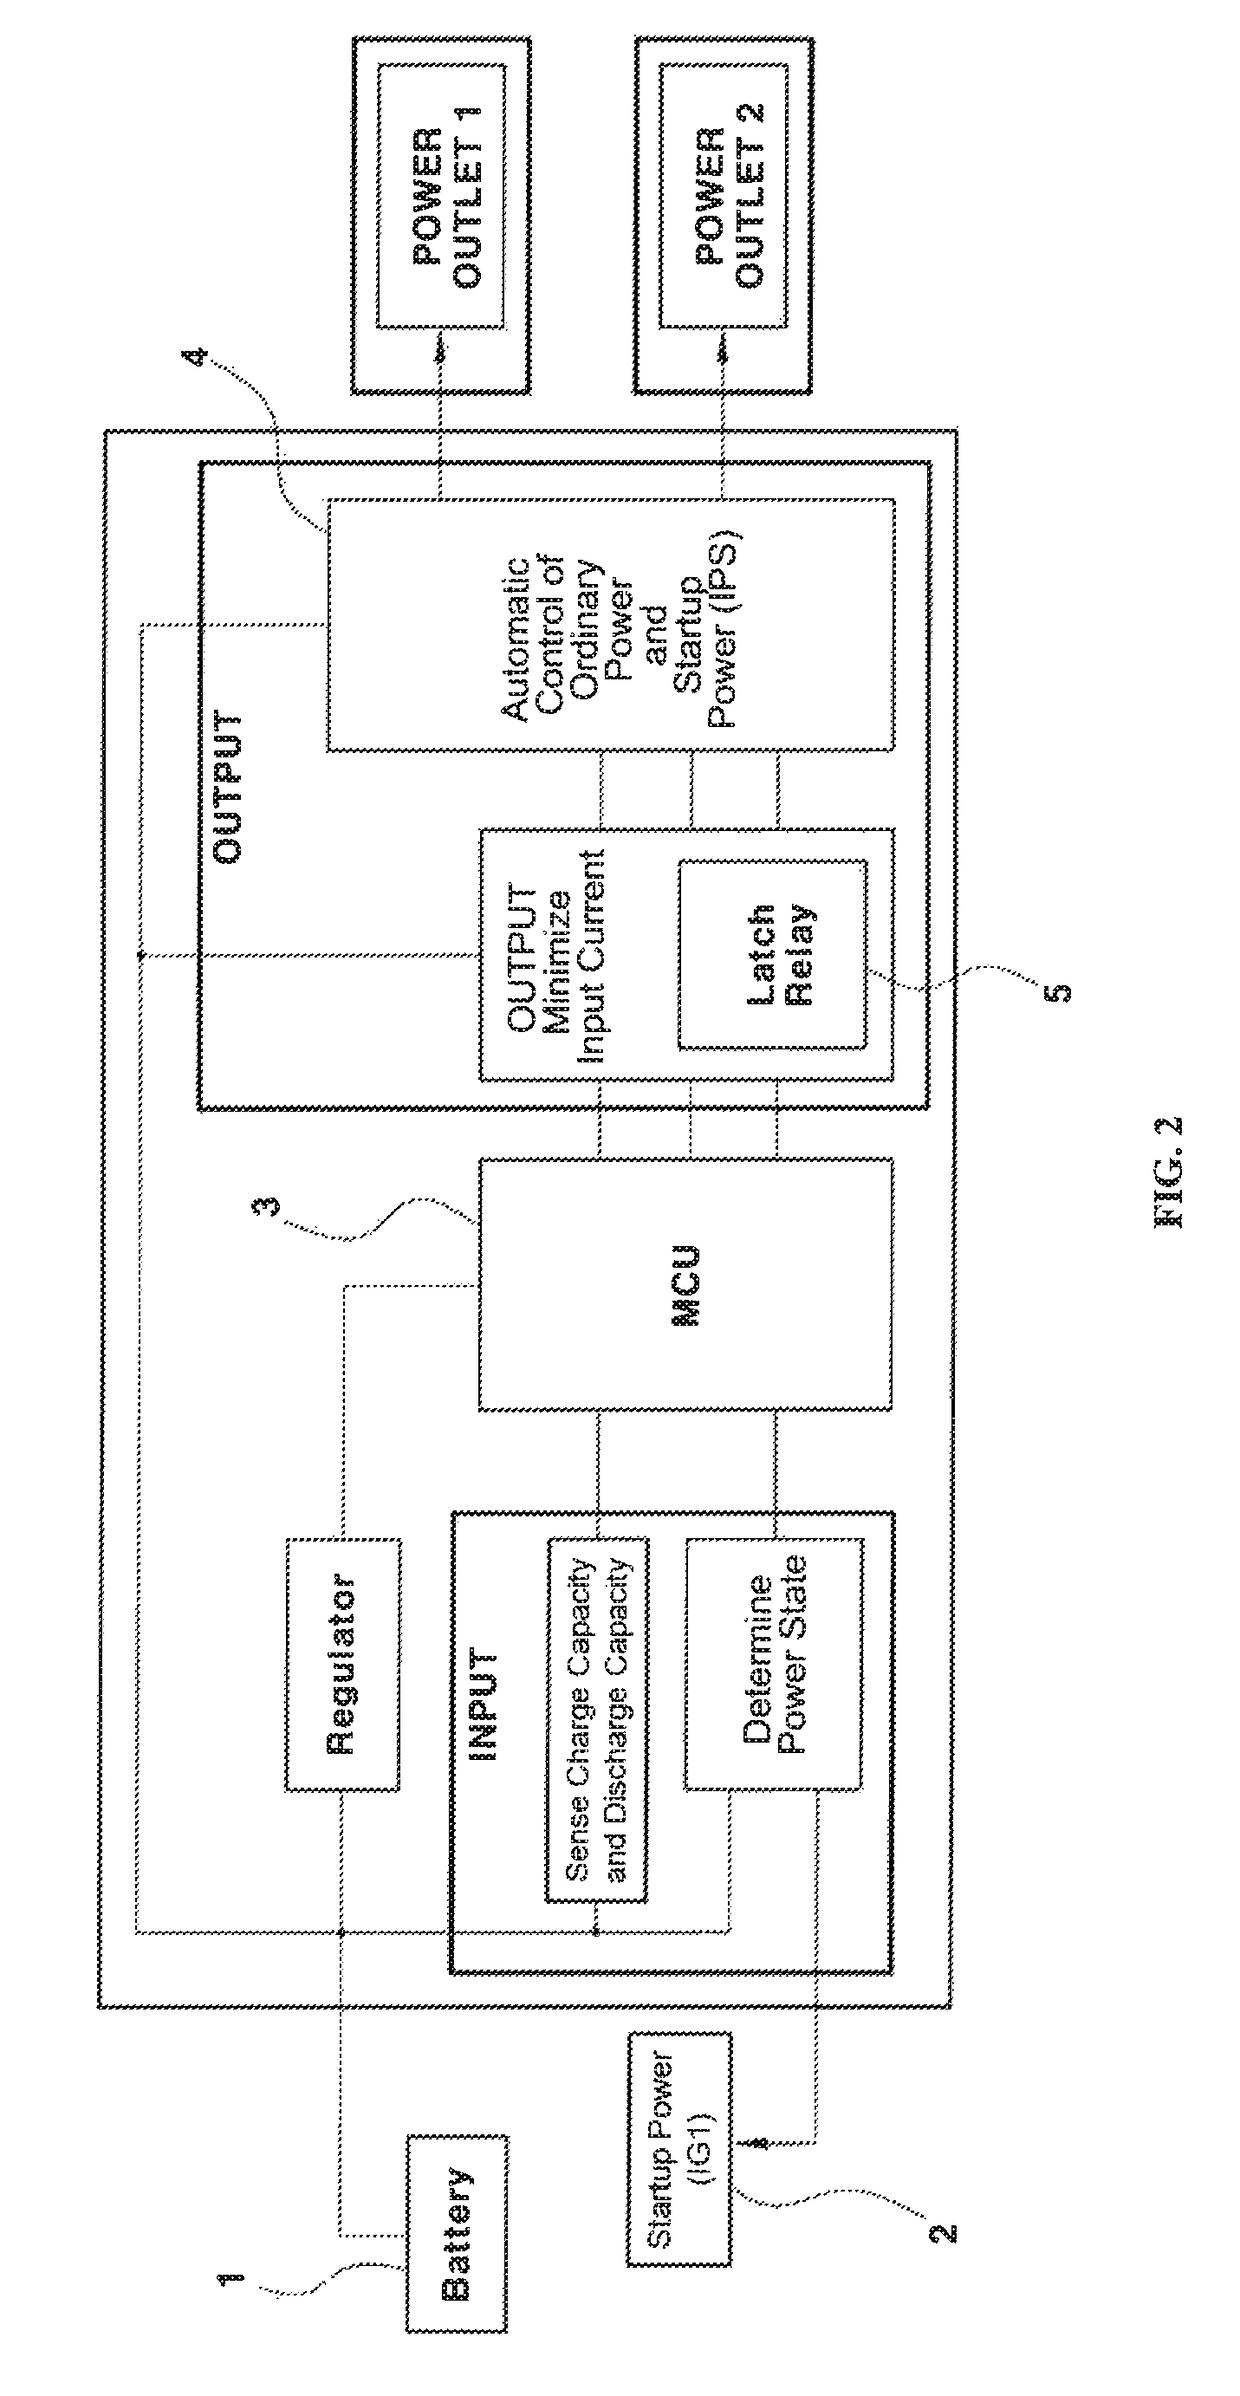 Power control system and method for vehicle power outlets